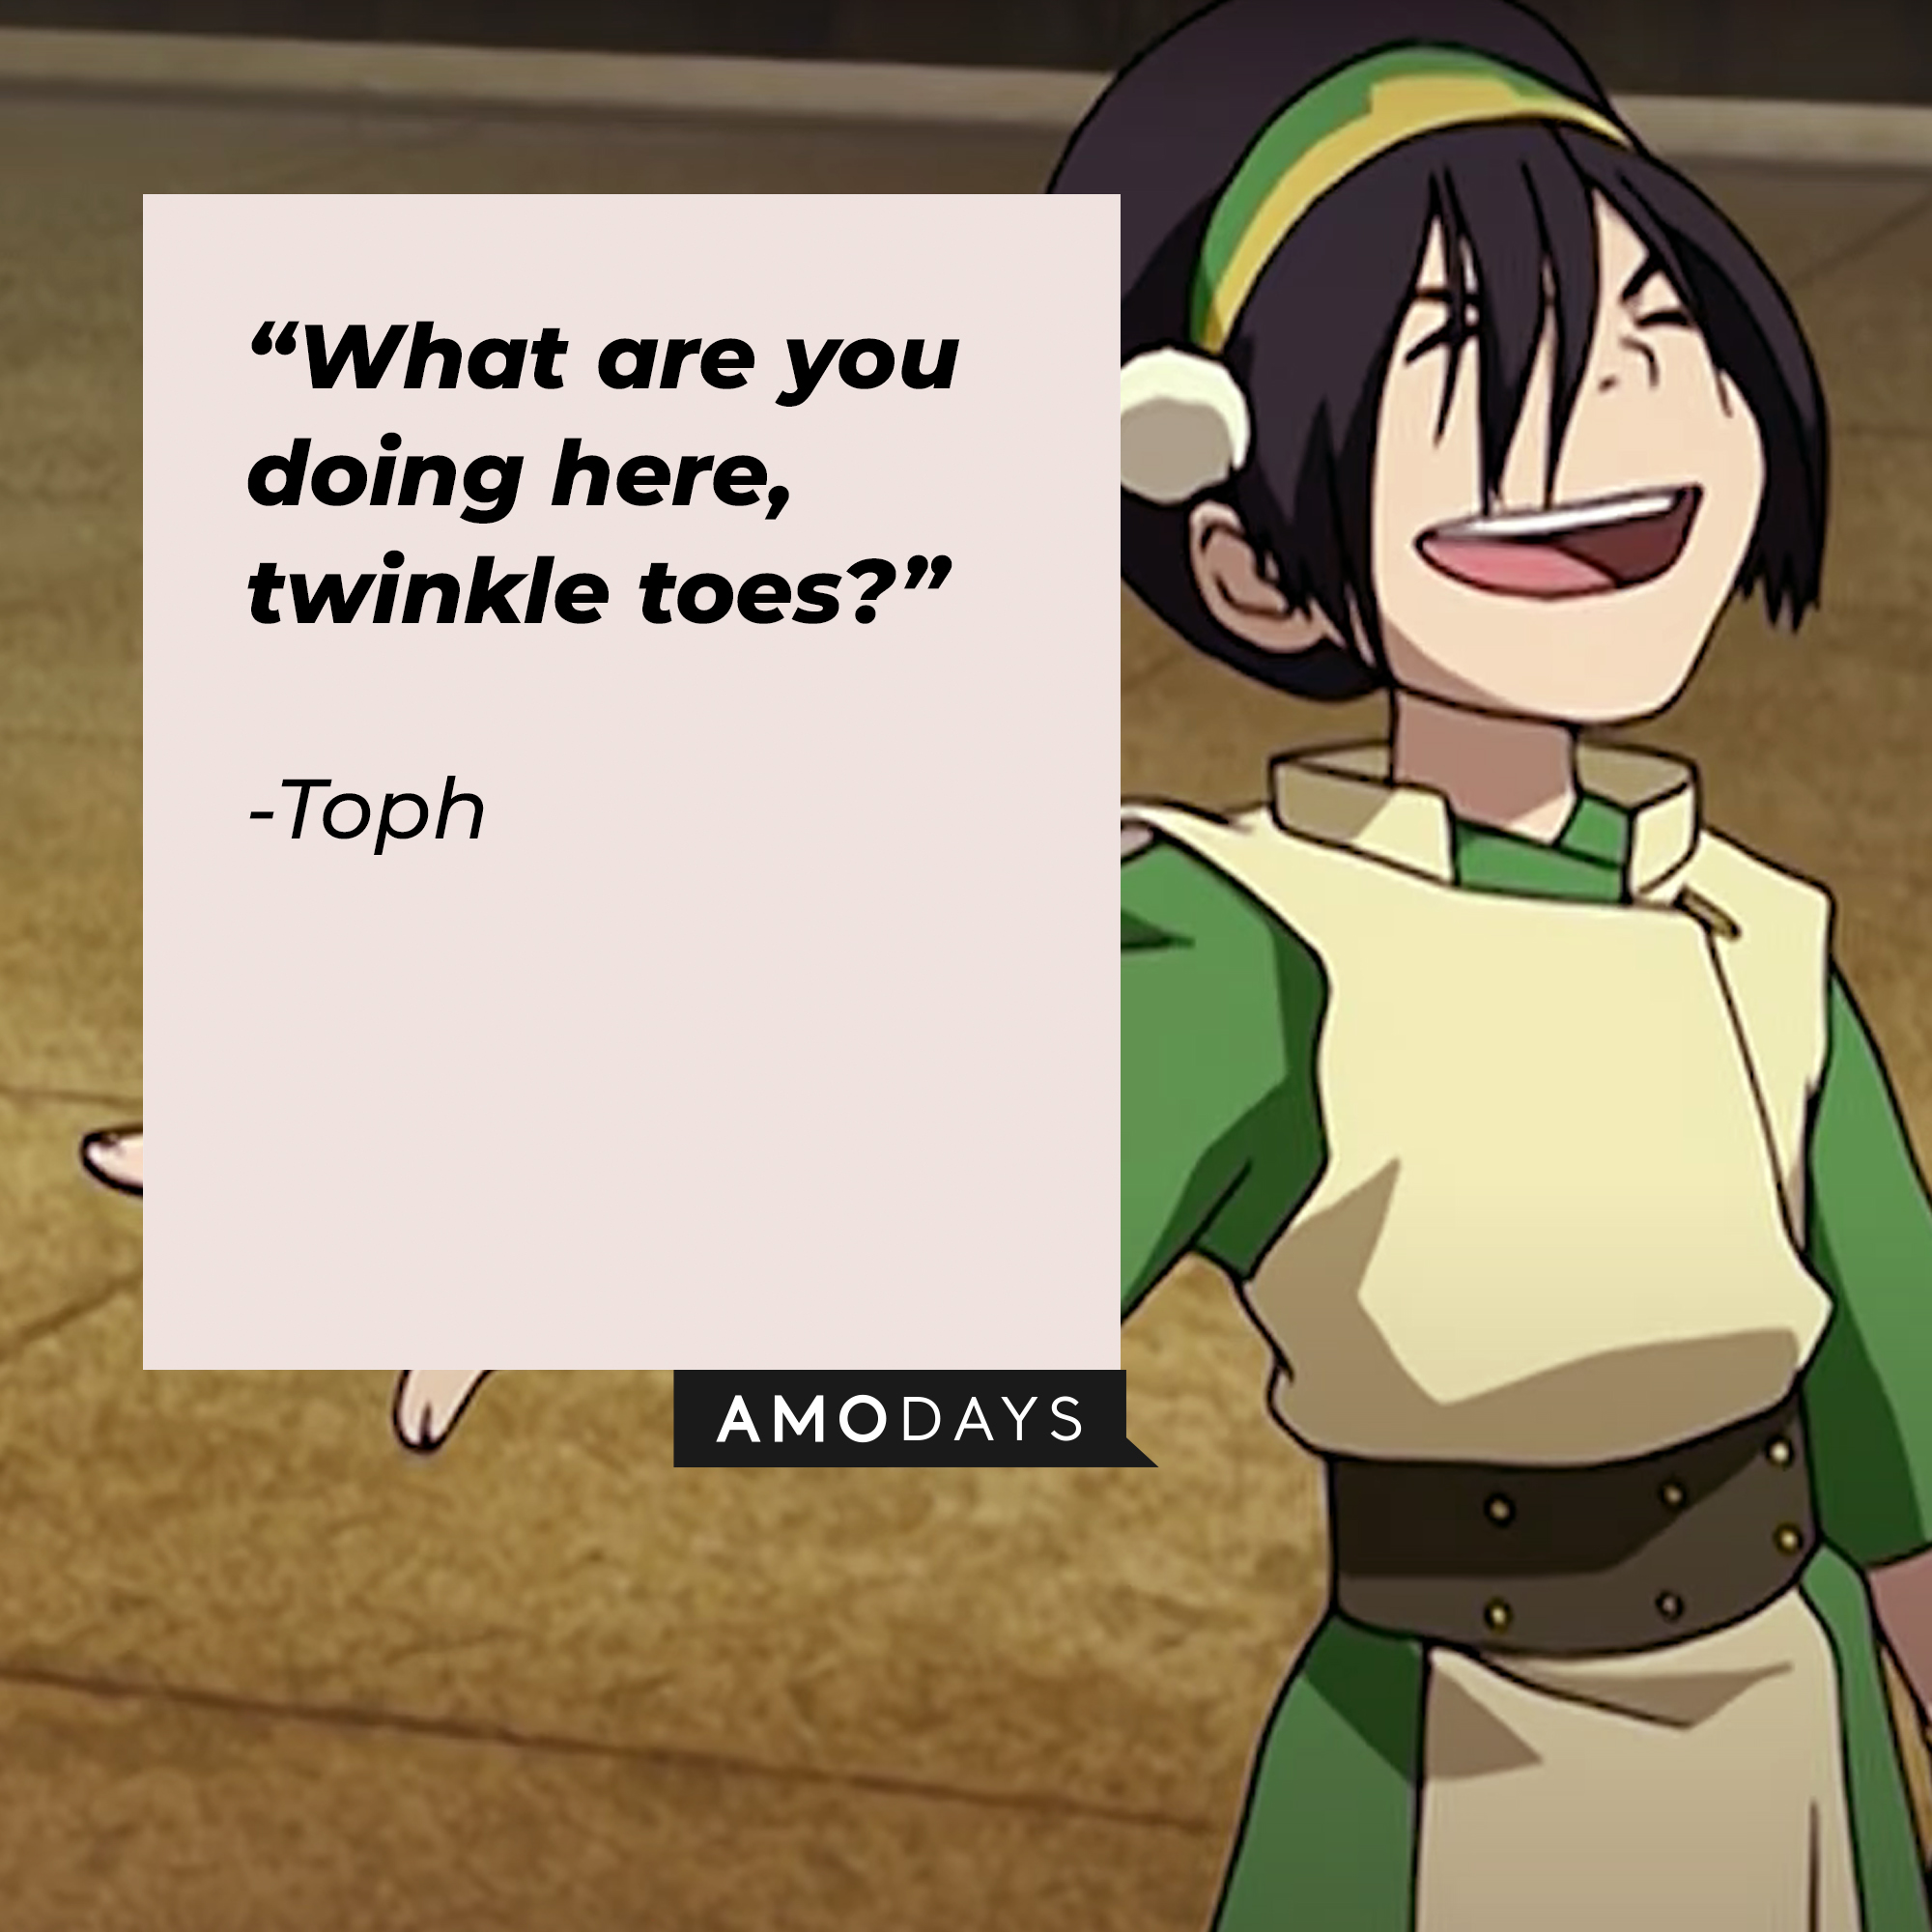 Toph's quote: “What are you doing here, twinkle toes?” | Source: youtube.com/TeamAvatar